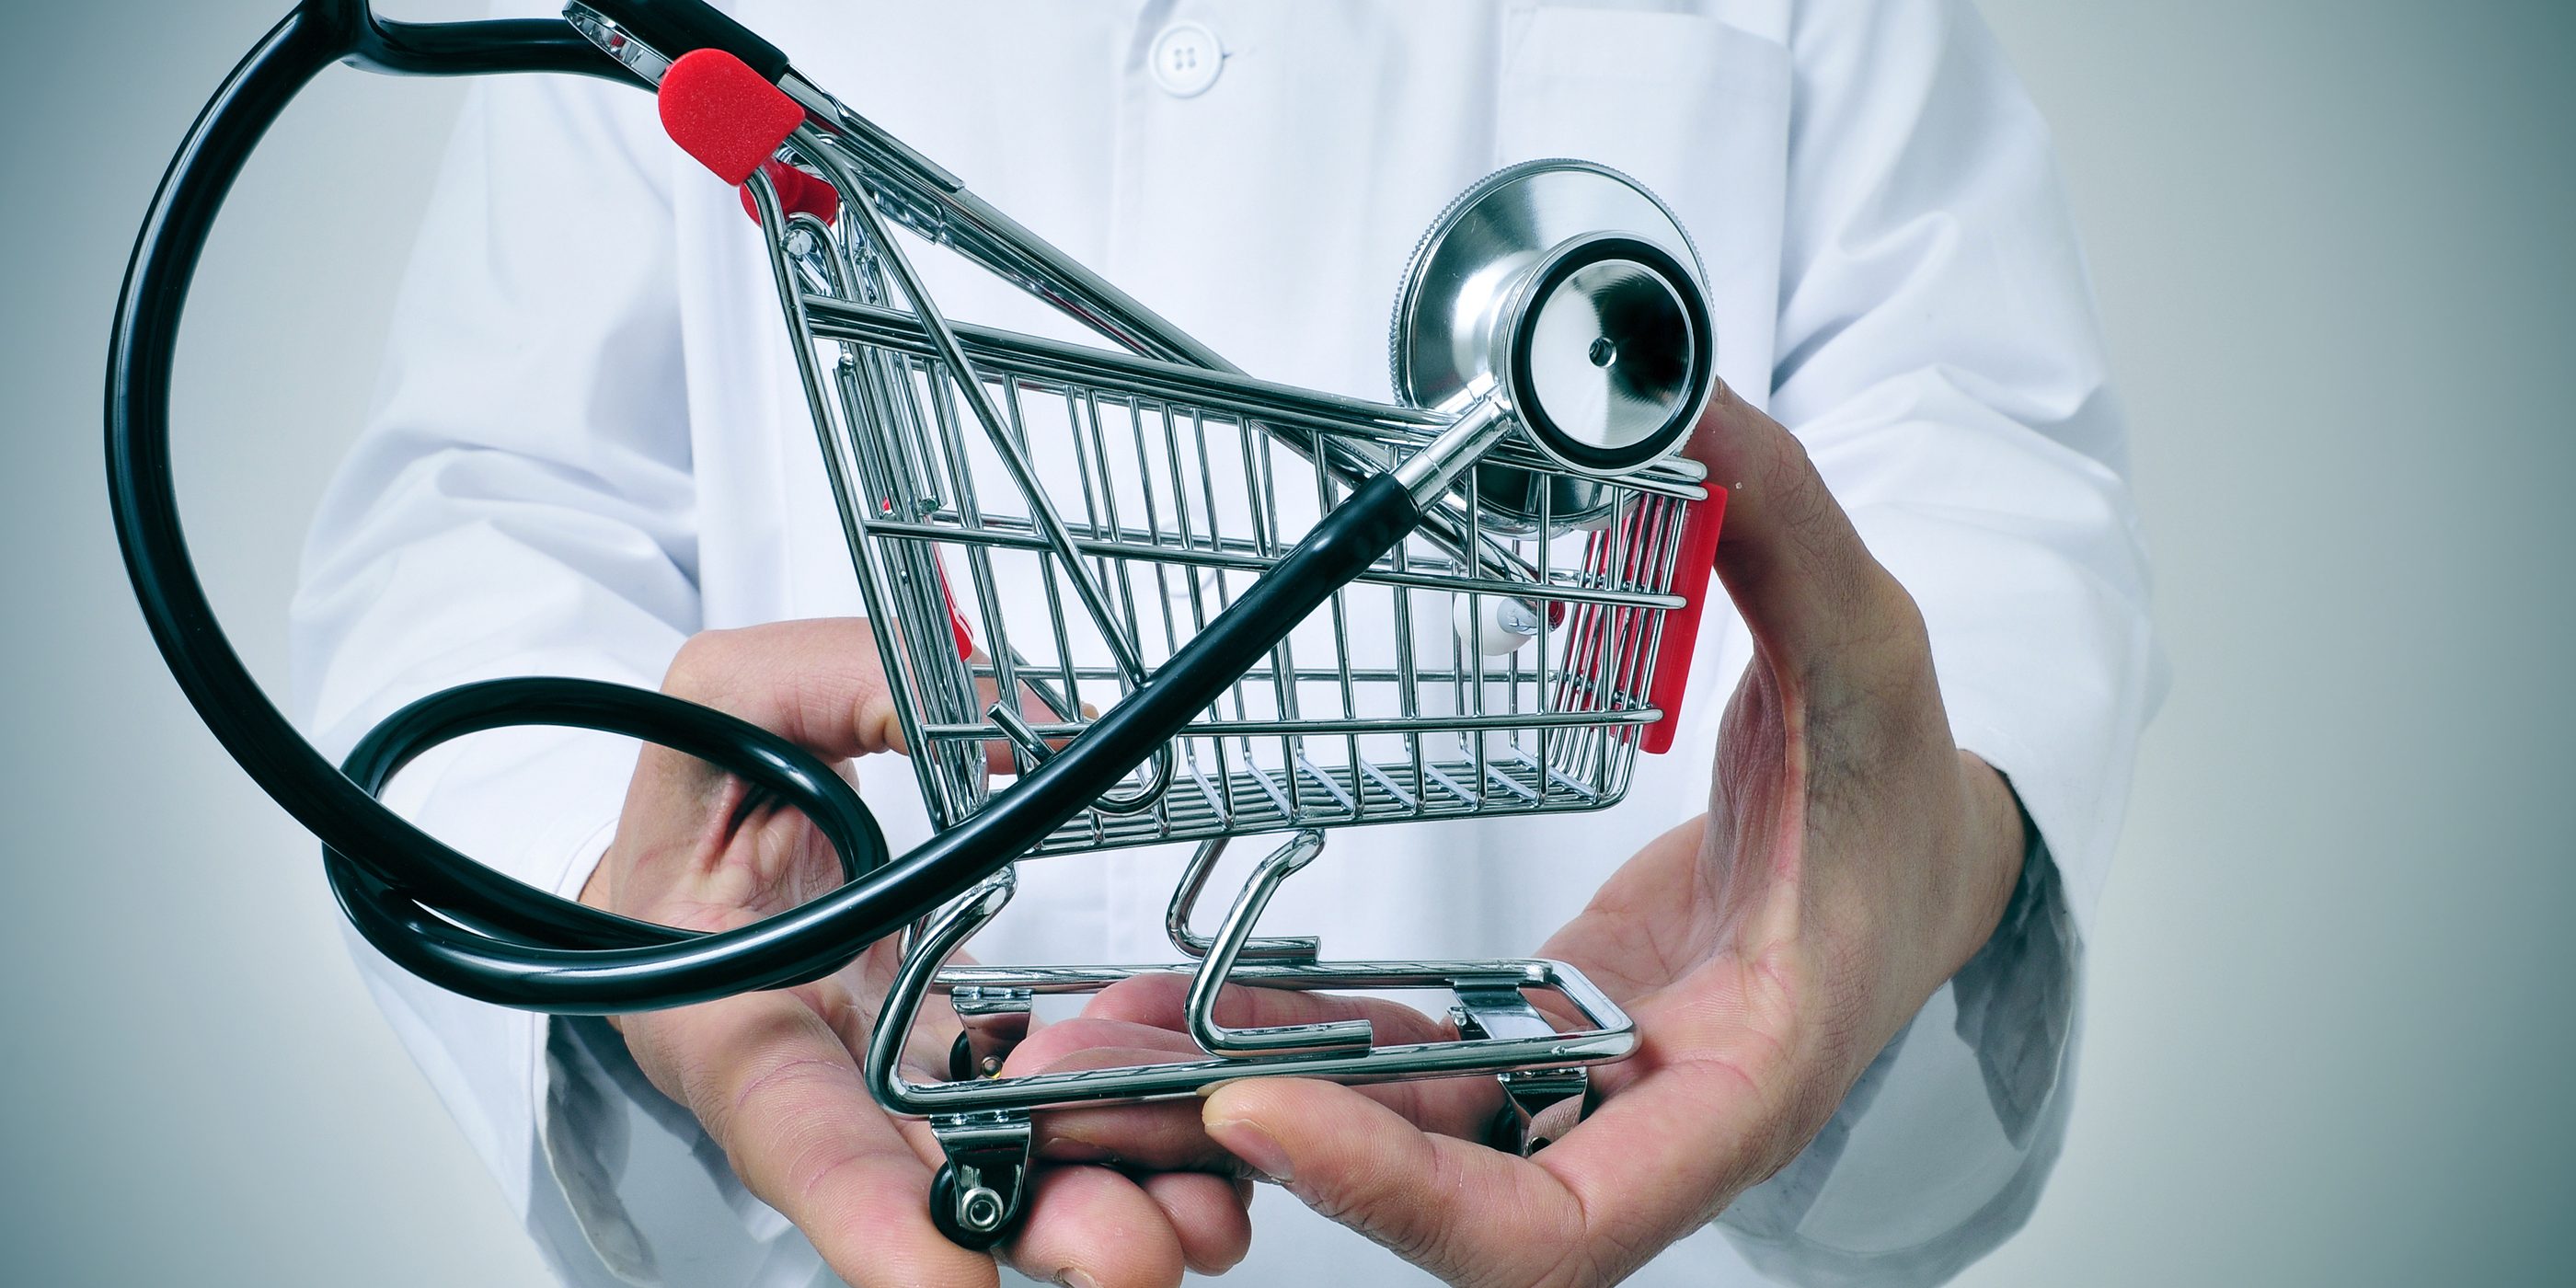 doctor holding in his hand a shopping cart with a stethoscope inside, depicting the health care industry concept